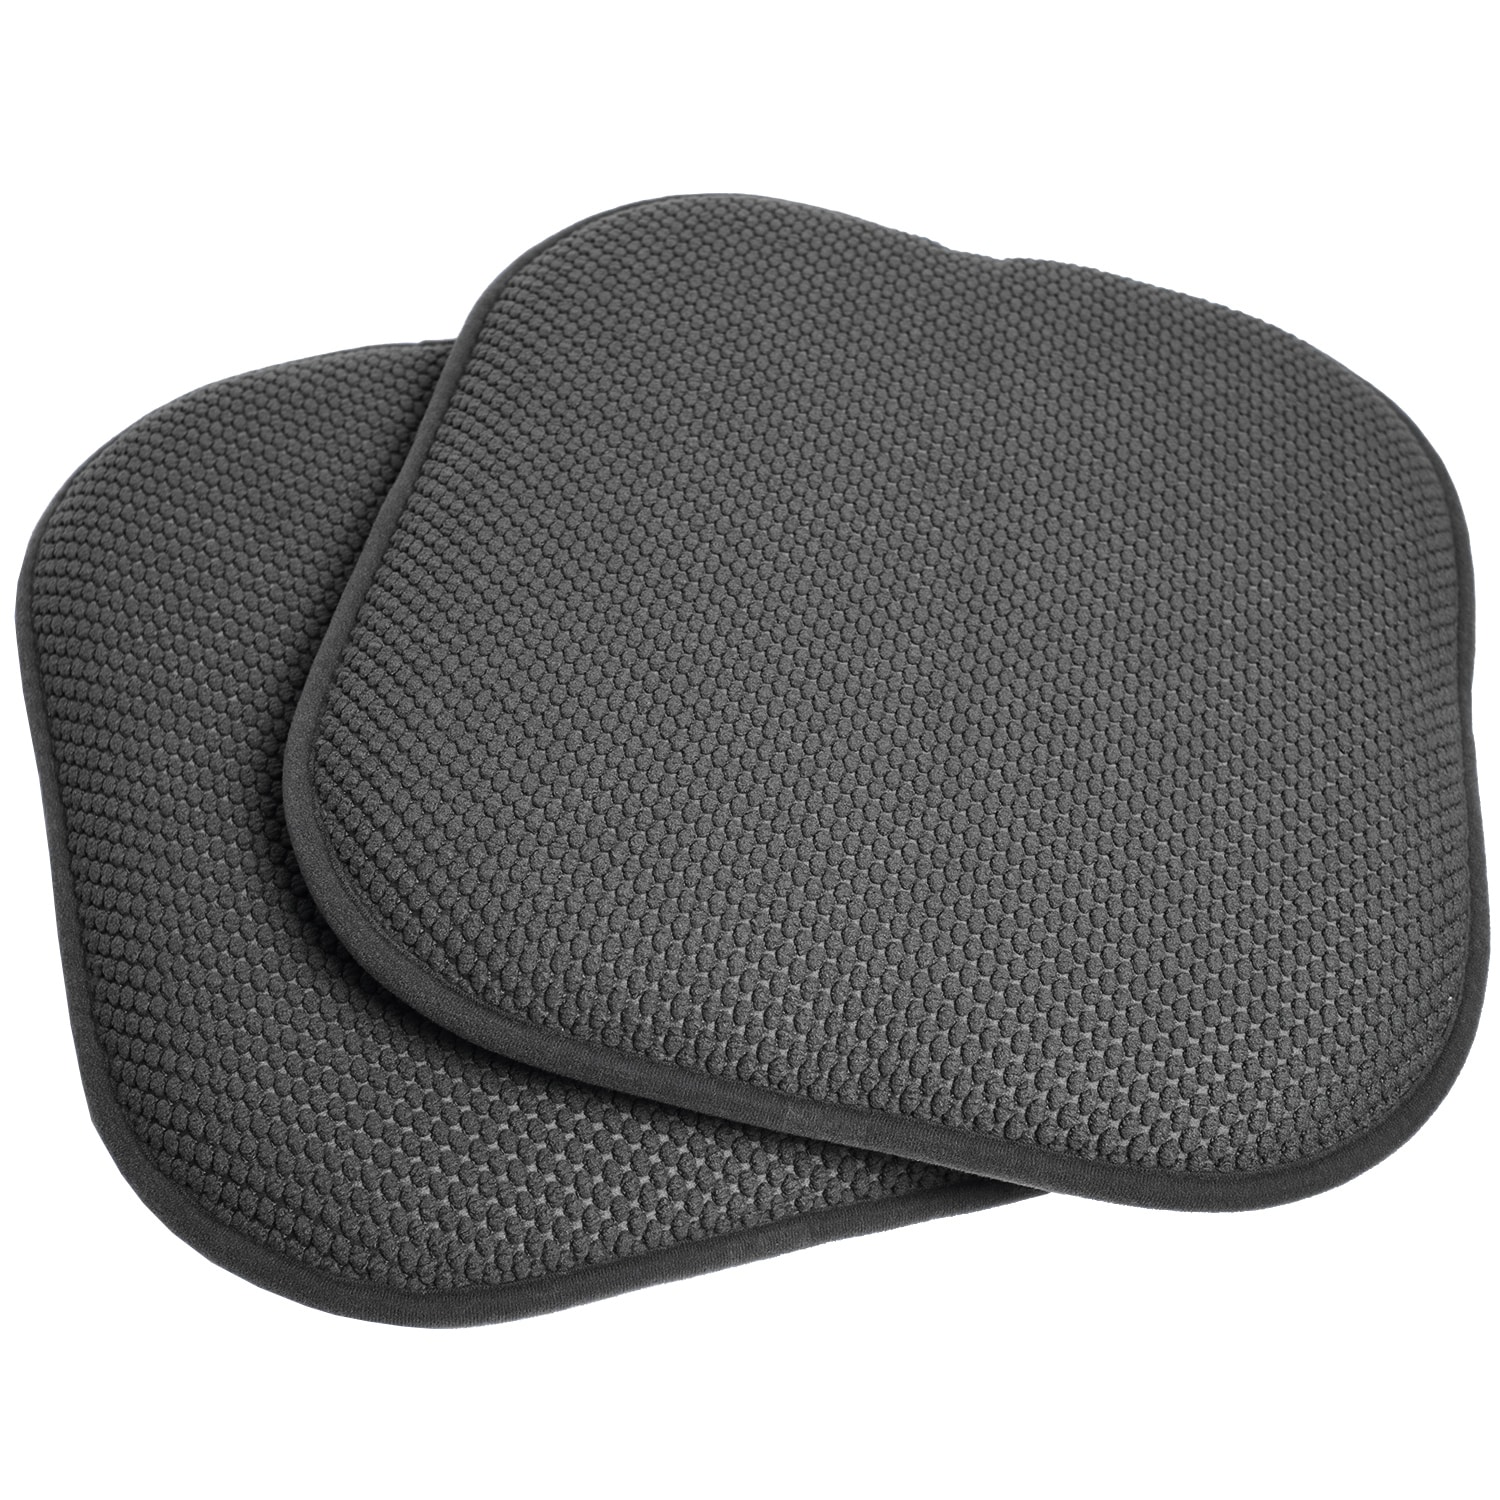 https://ak1.ostkcdn.com/images/products/10295231/16x16-Memory-Foam-Chair-Pad-Seat-Cushion-with-Non-Slip-Backing-2-or-4-Pack-39a16fdf-8496-4581-80ca-eef24dc66f81.jpg